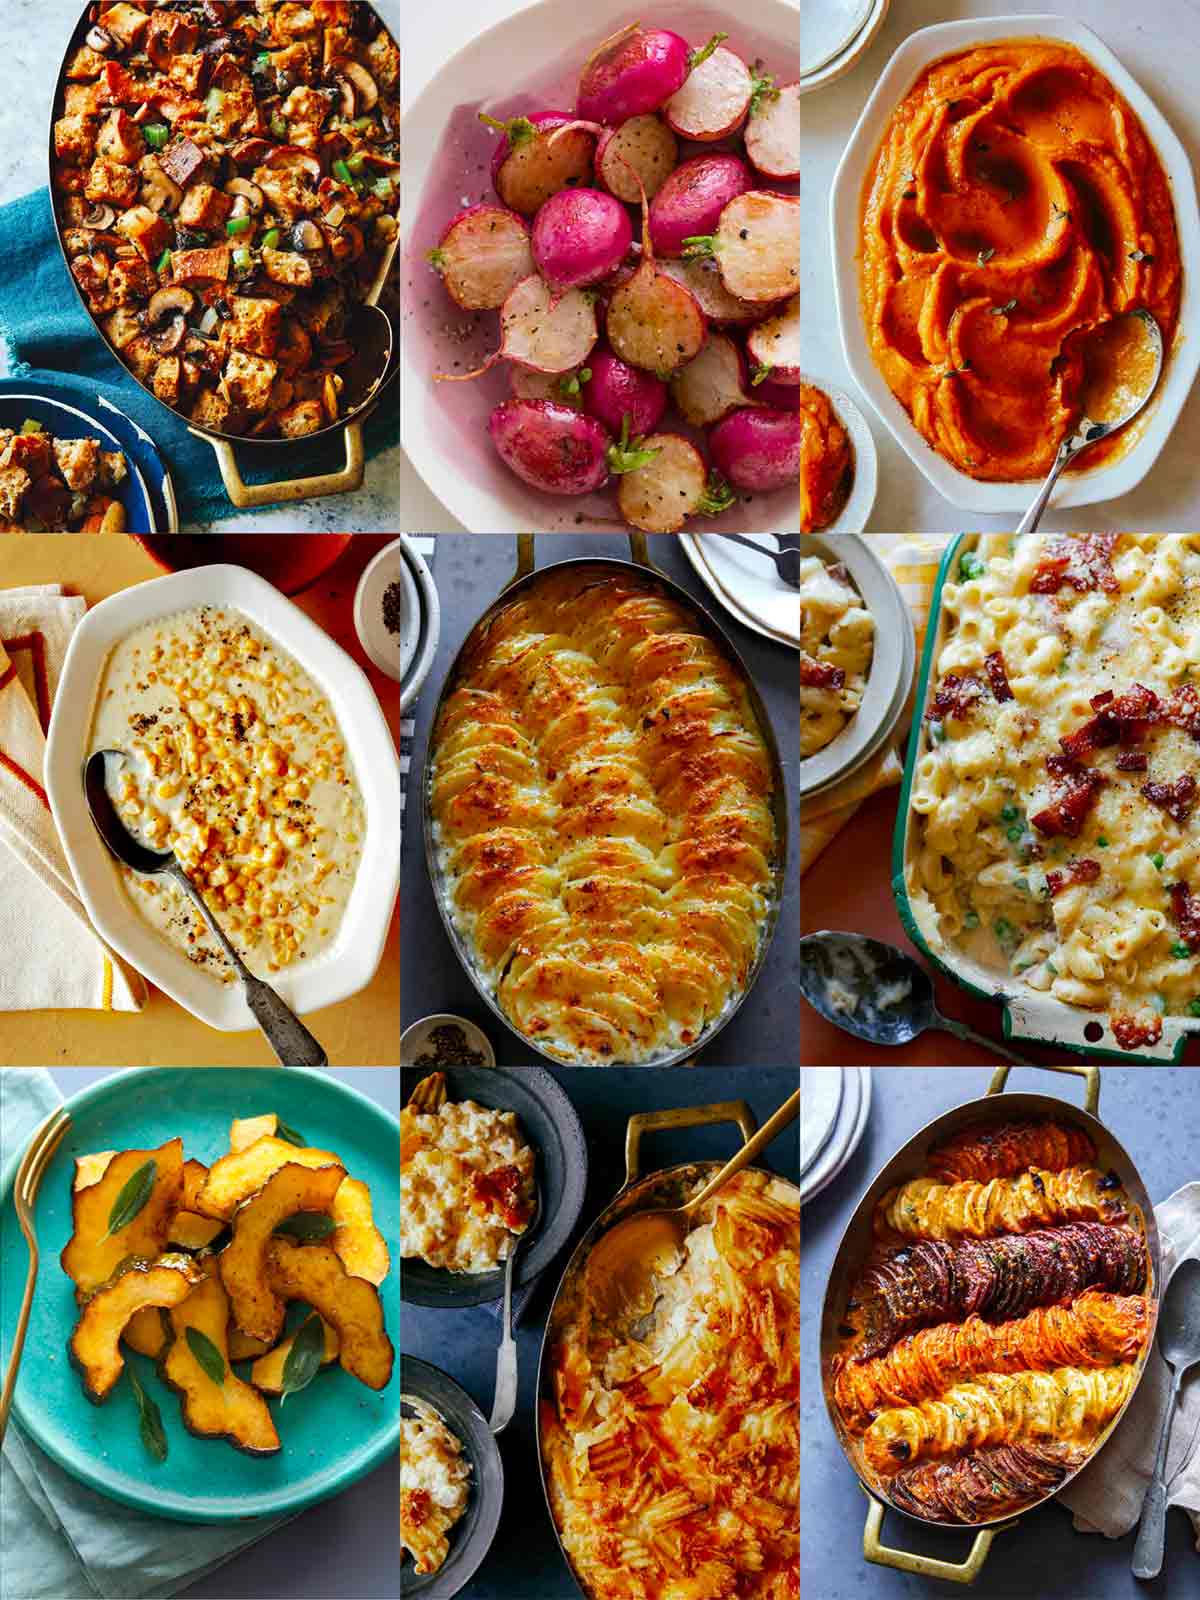 Your Ideal Thanksgiving Dish, According to Your Zodiac Sign